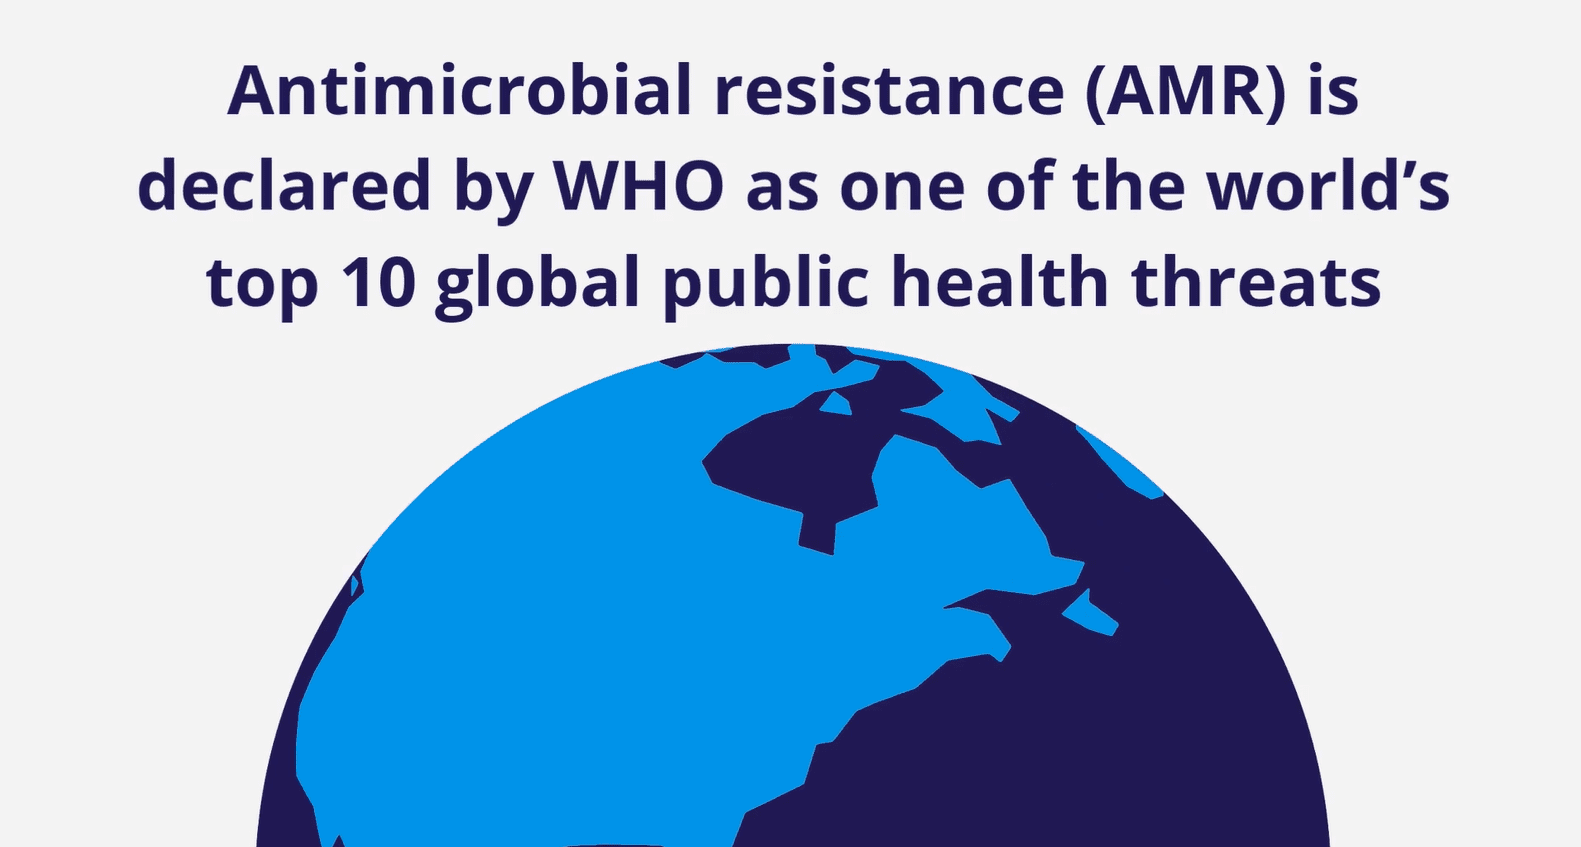 Antimicrobial Resistance (AMR): Stopping the rise of superbugs! 